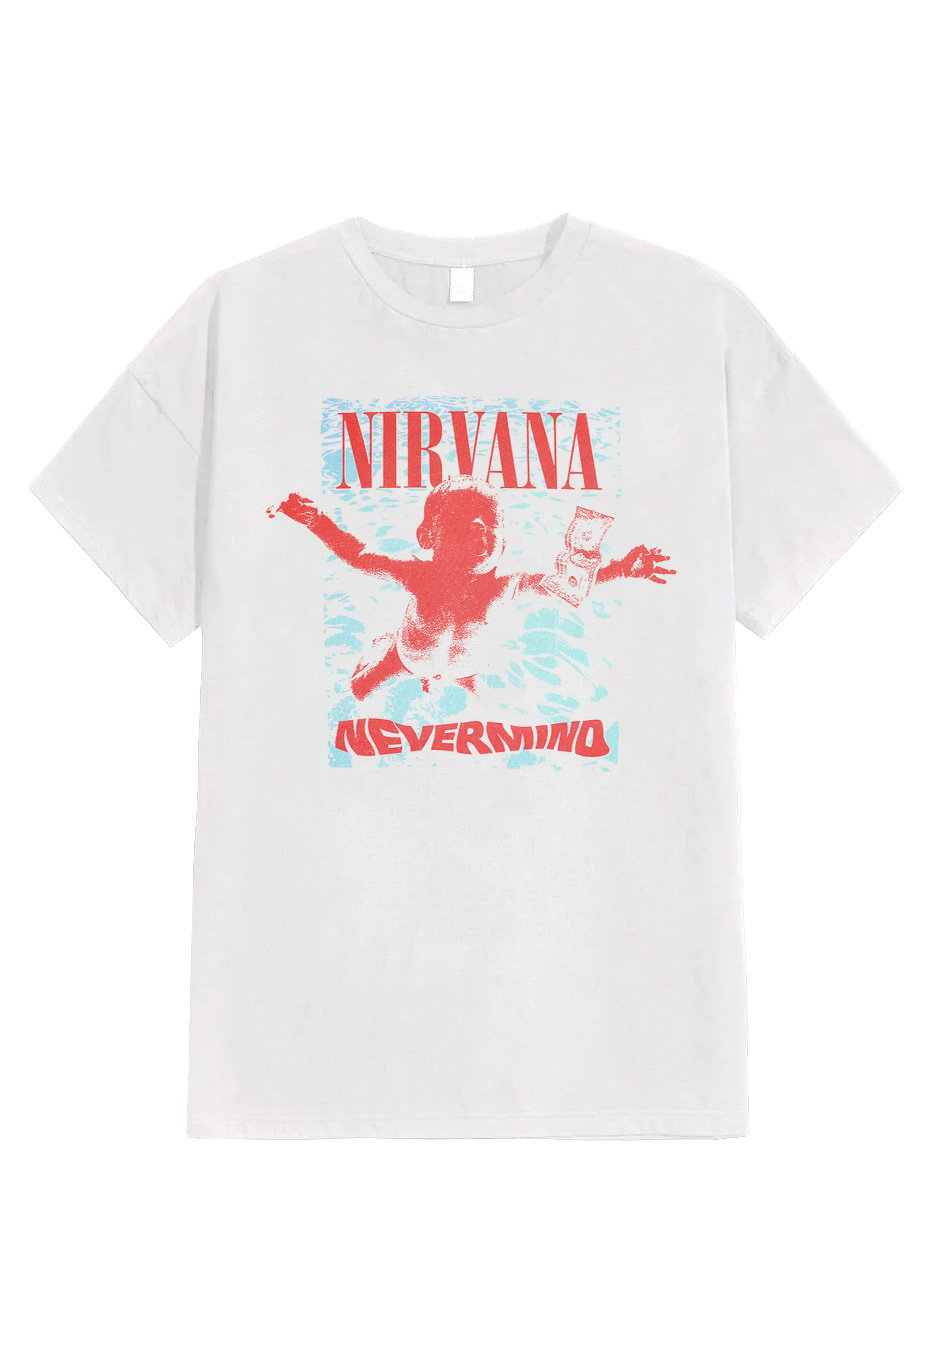 Nirvana - People Are People White - T-Shirt